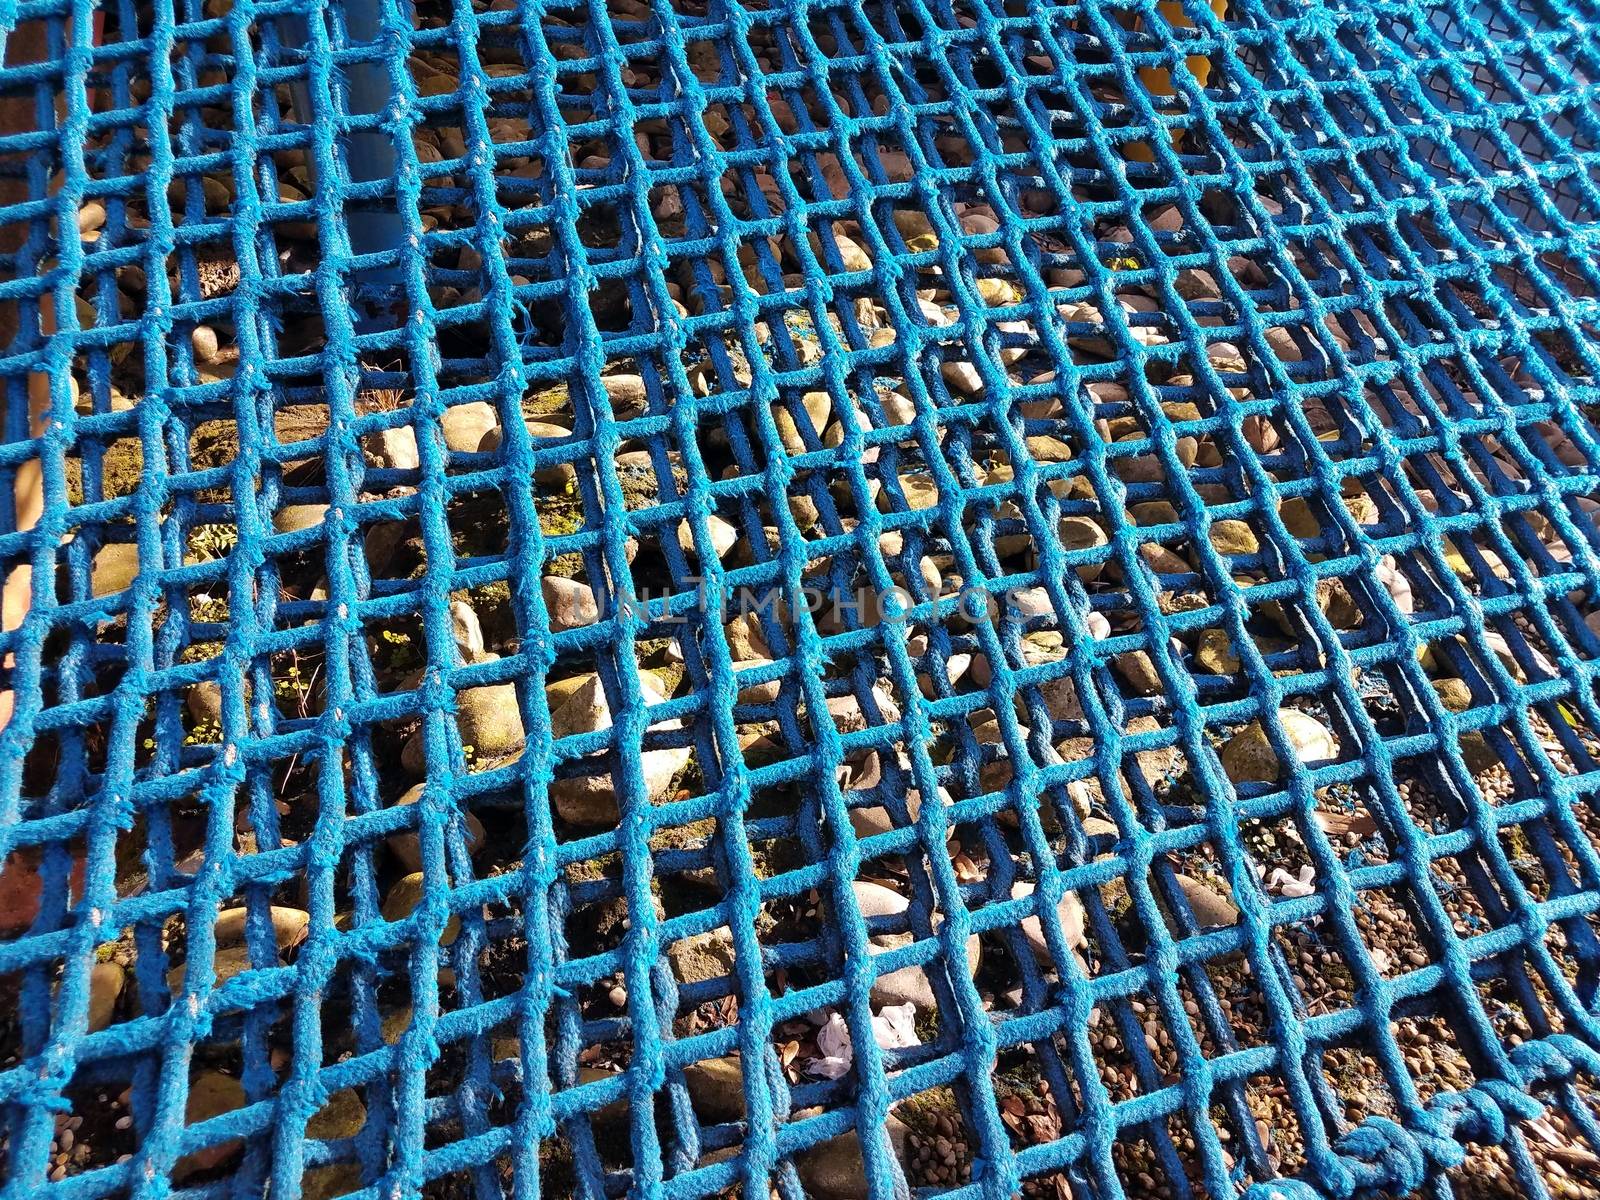 blue net or rope with rocks or stones by stockphotofan1